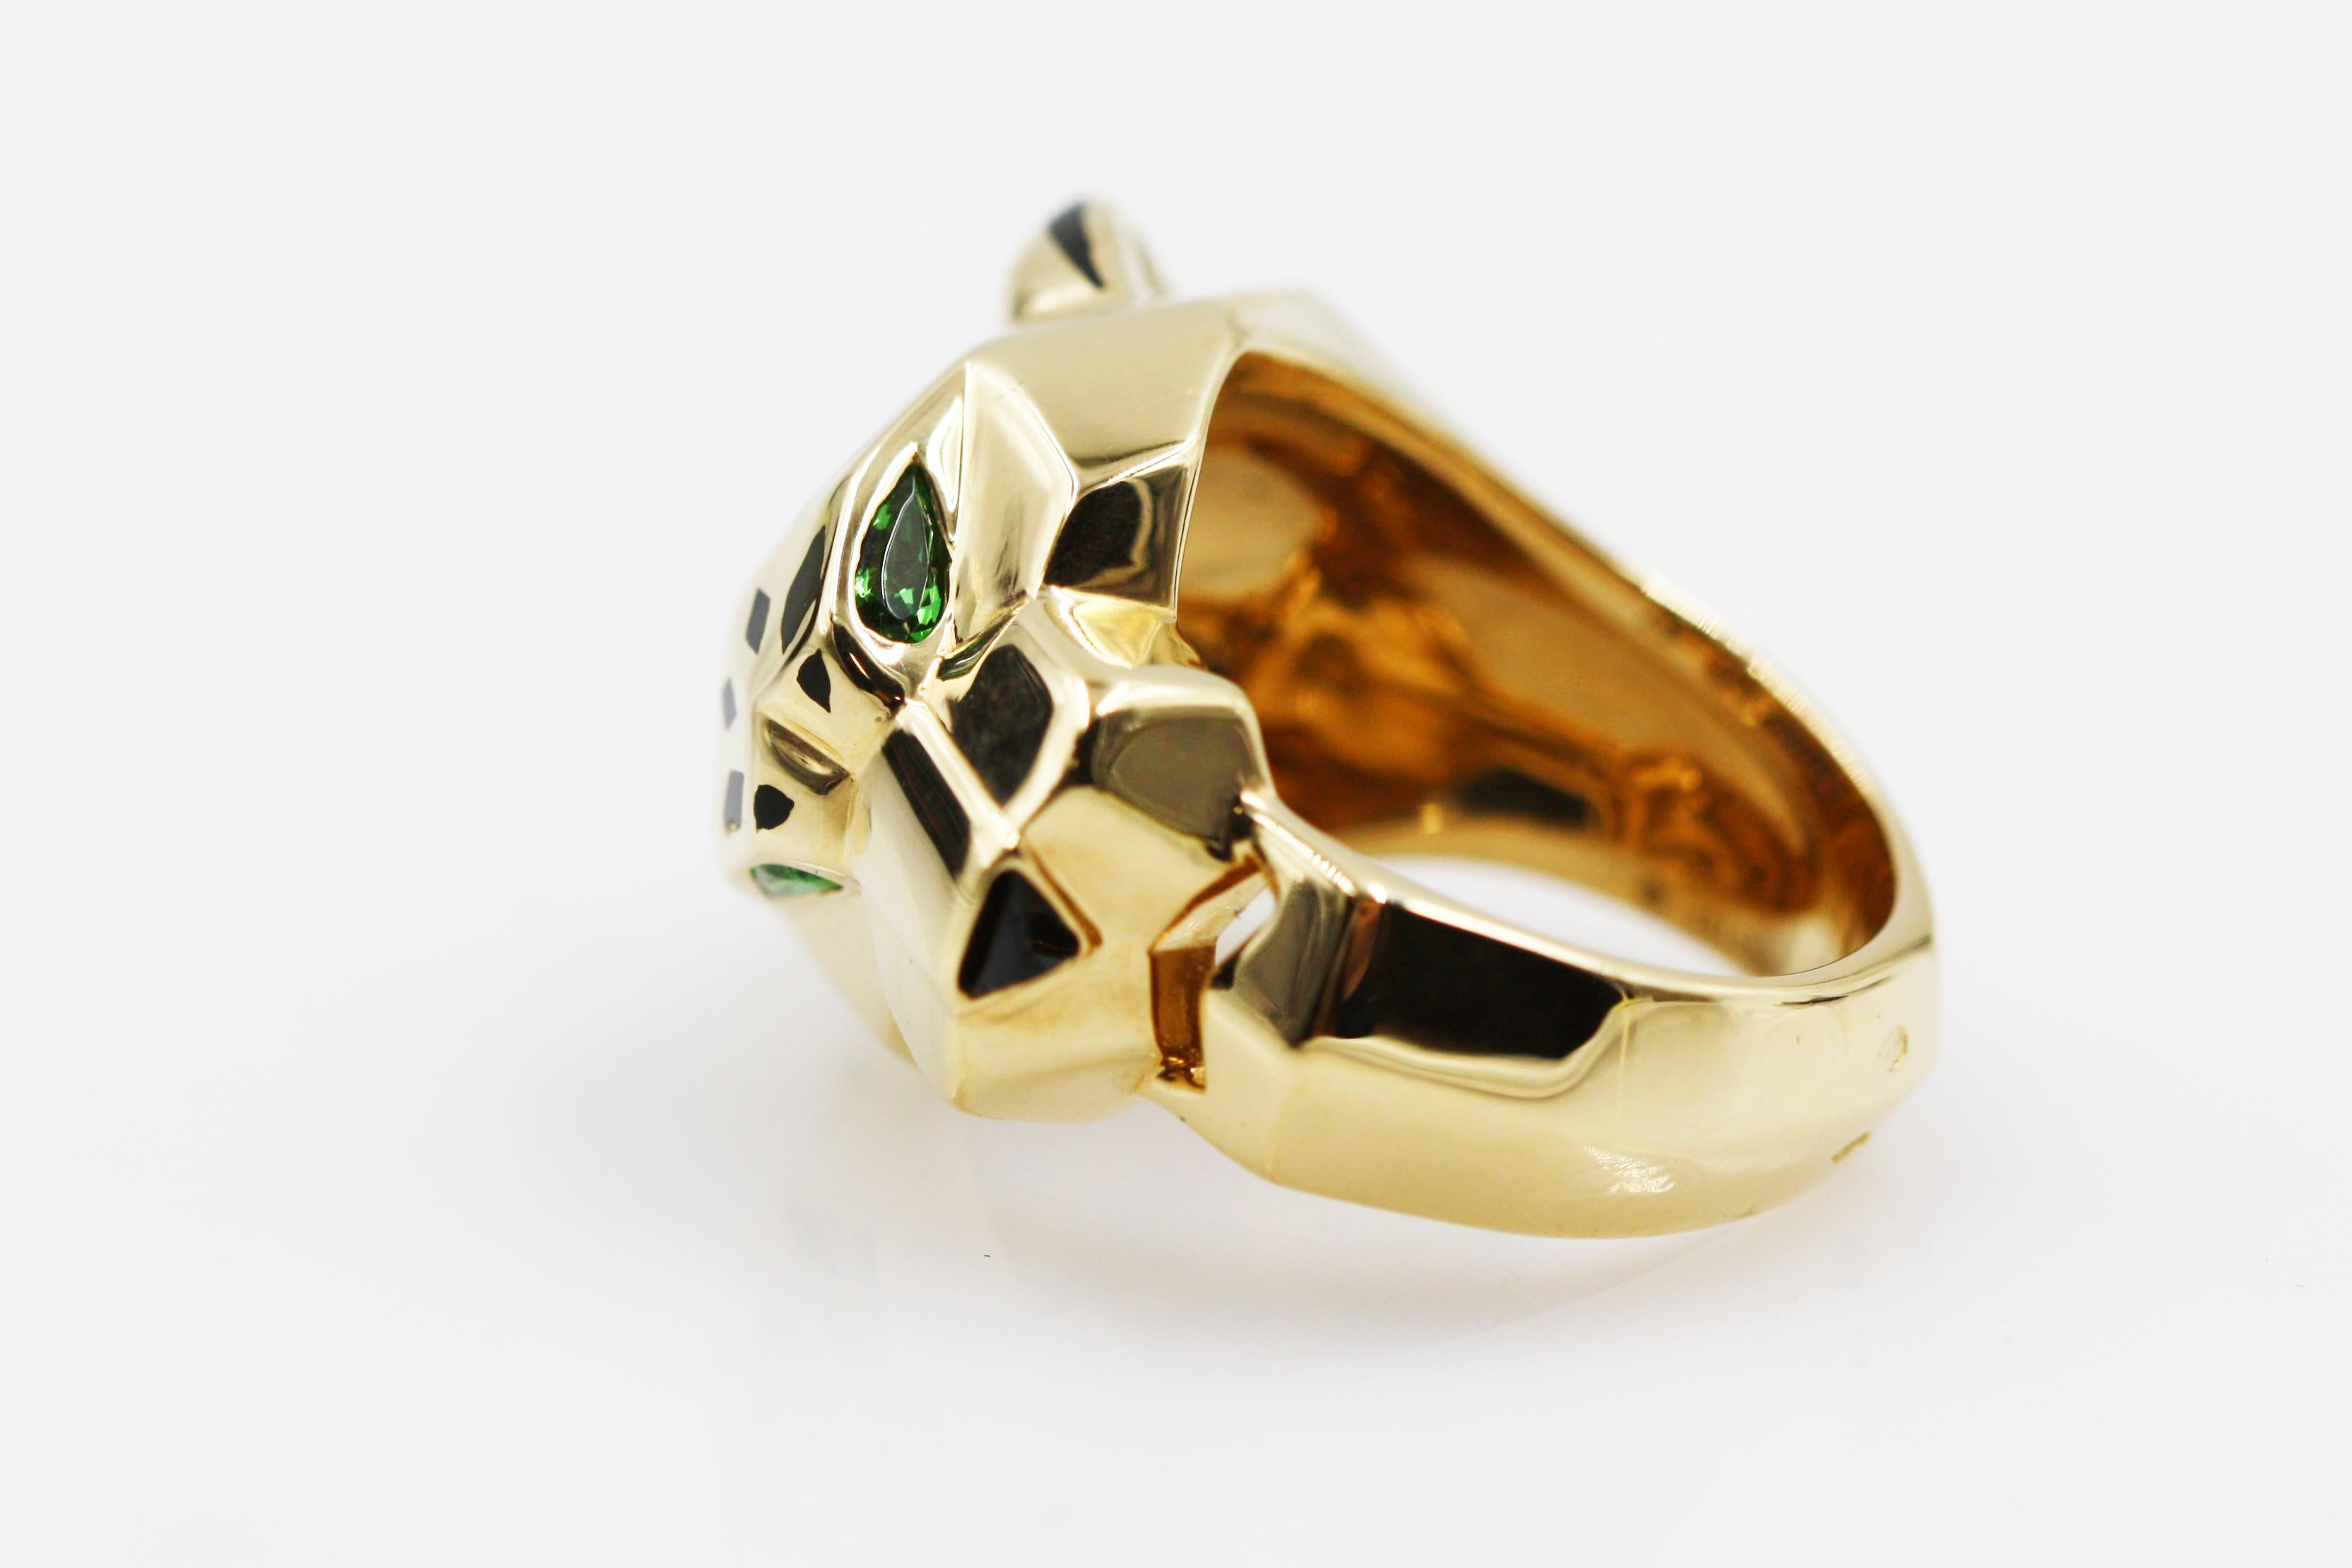 This incredible panther ring is the favorite of the Cartier brand, this prestigious brand chose the panther to be its representative animal. This ring is made in 18K yellow gold and embelished with black lacquer. Tsavorite garnets, onyx. REF: